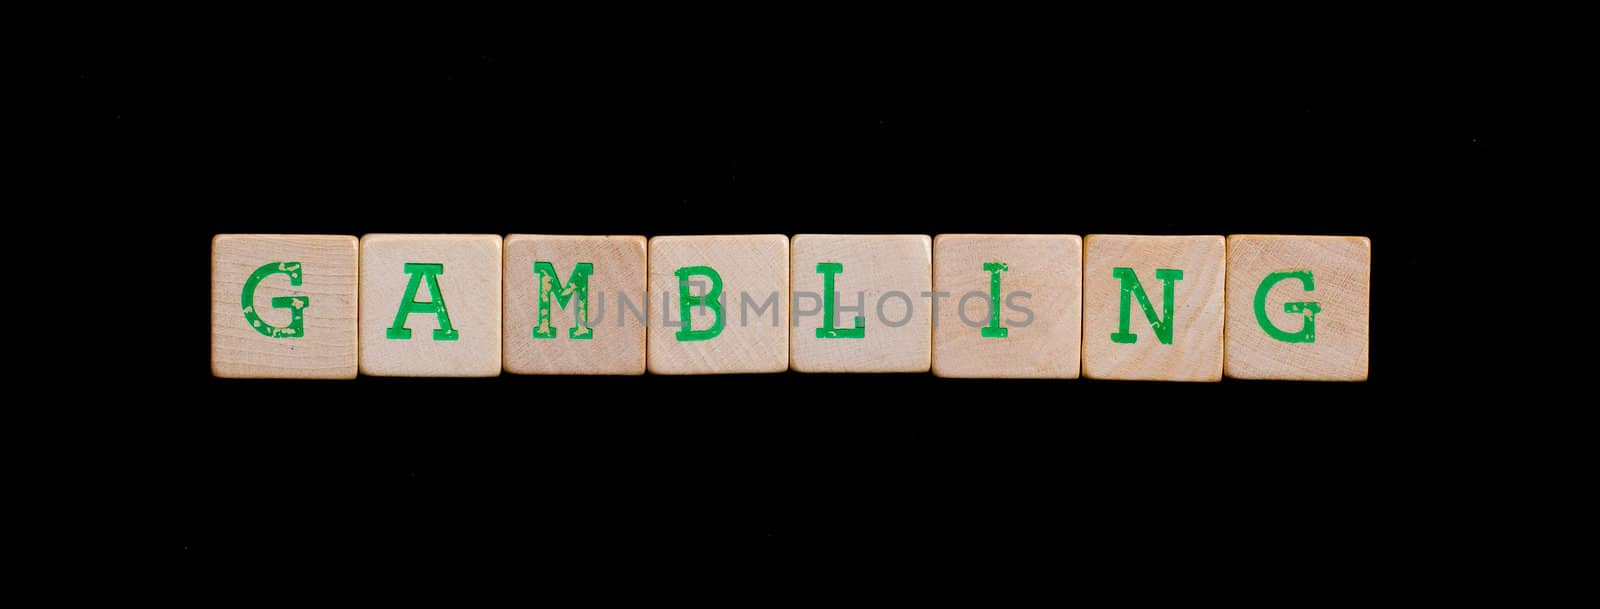 Green letters on old wooden blocks (gambling)